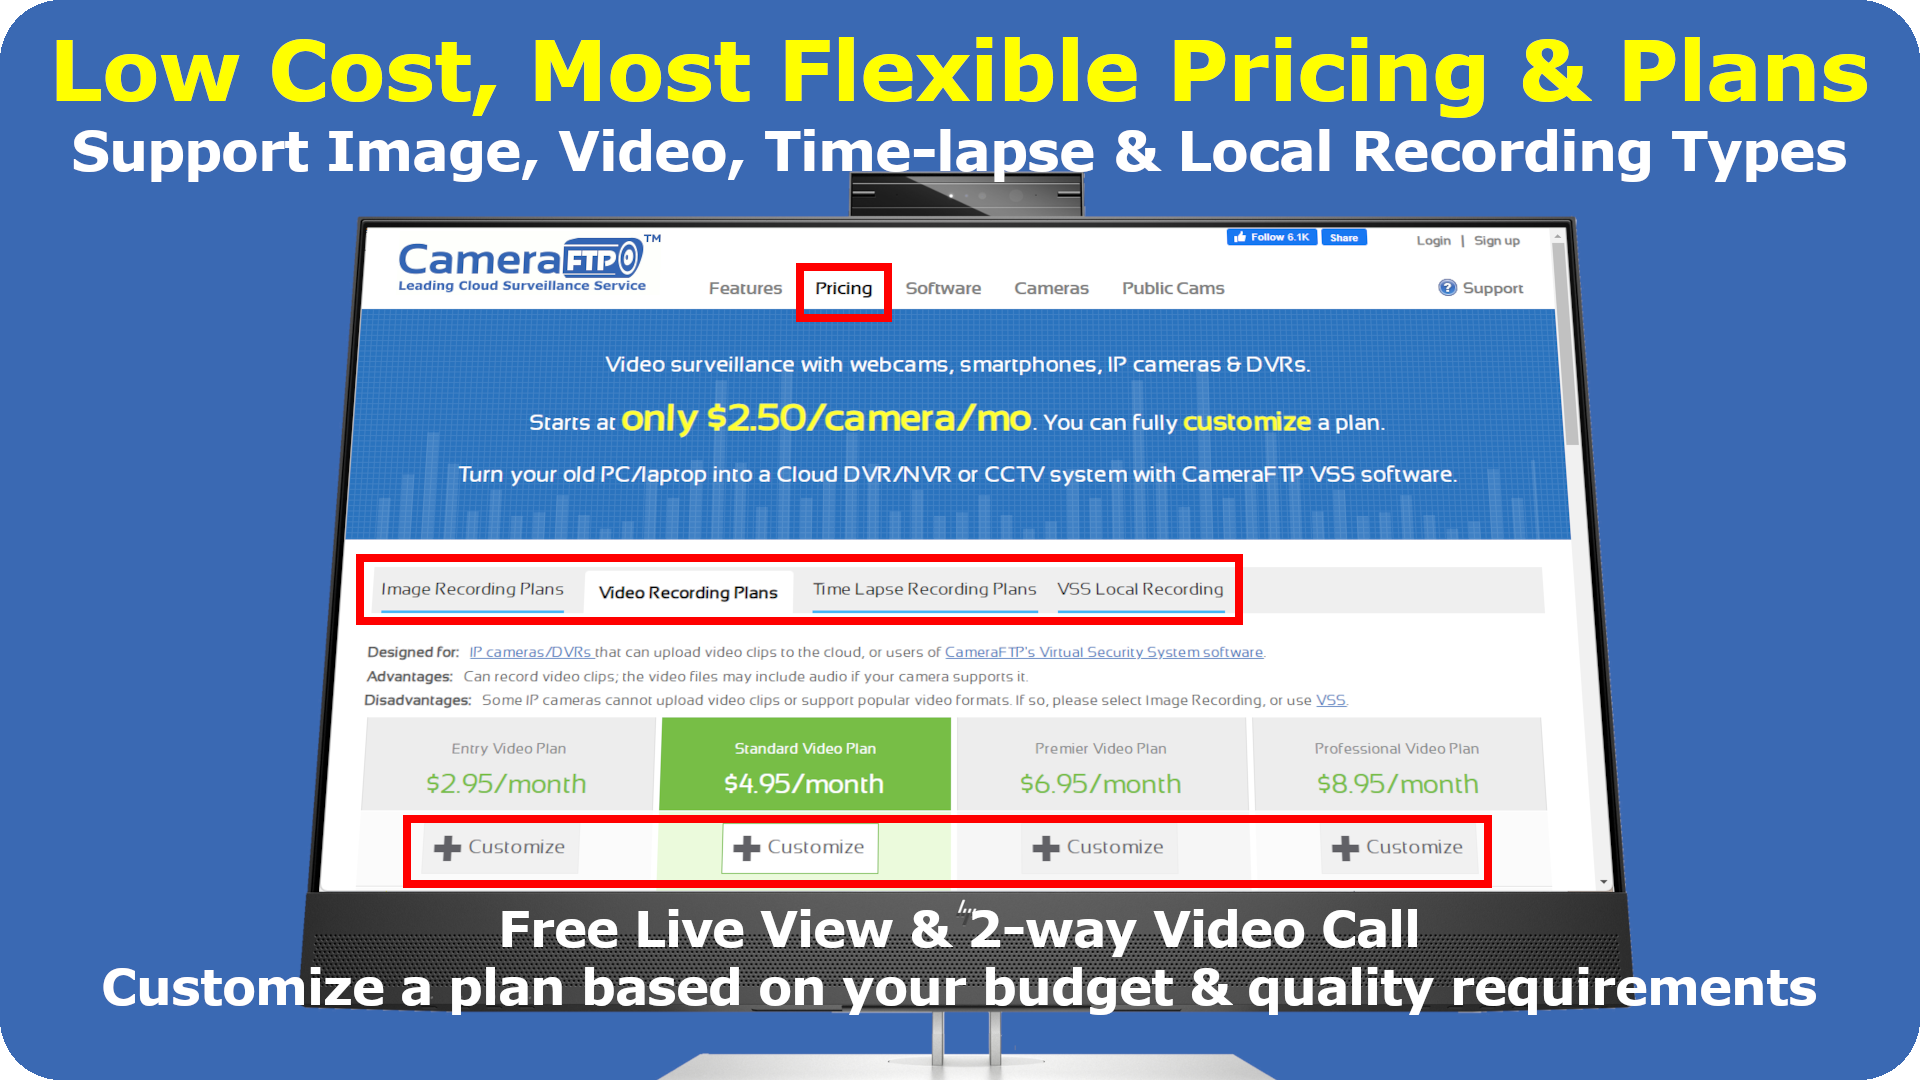 CameraFTP offers the most flexible service pricing and plans. It supports most cameras/NVRs; you can order 4 recording types; you can customize a plan based your budget and quality requirements.